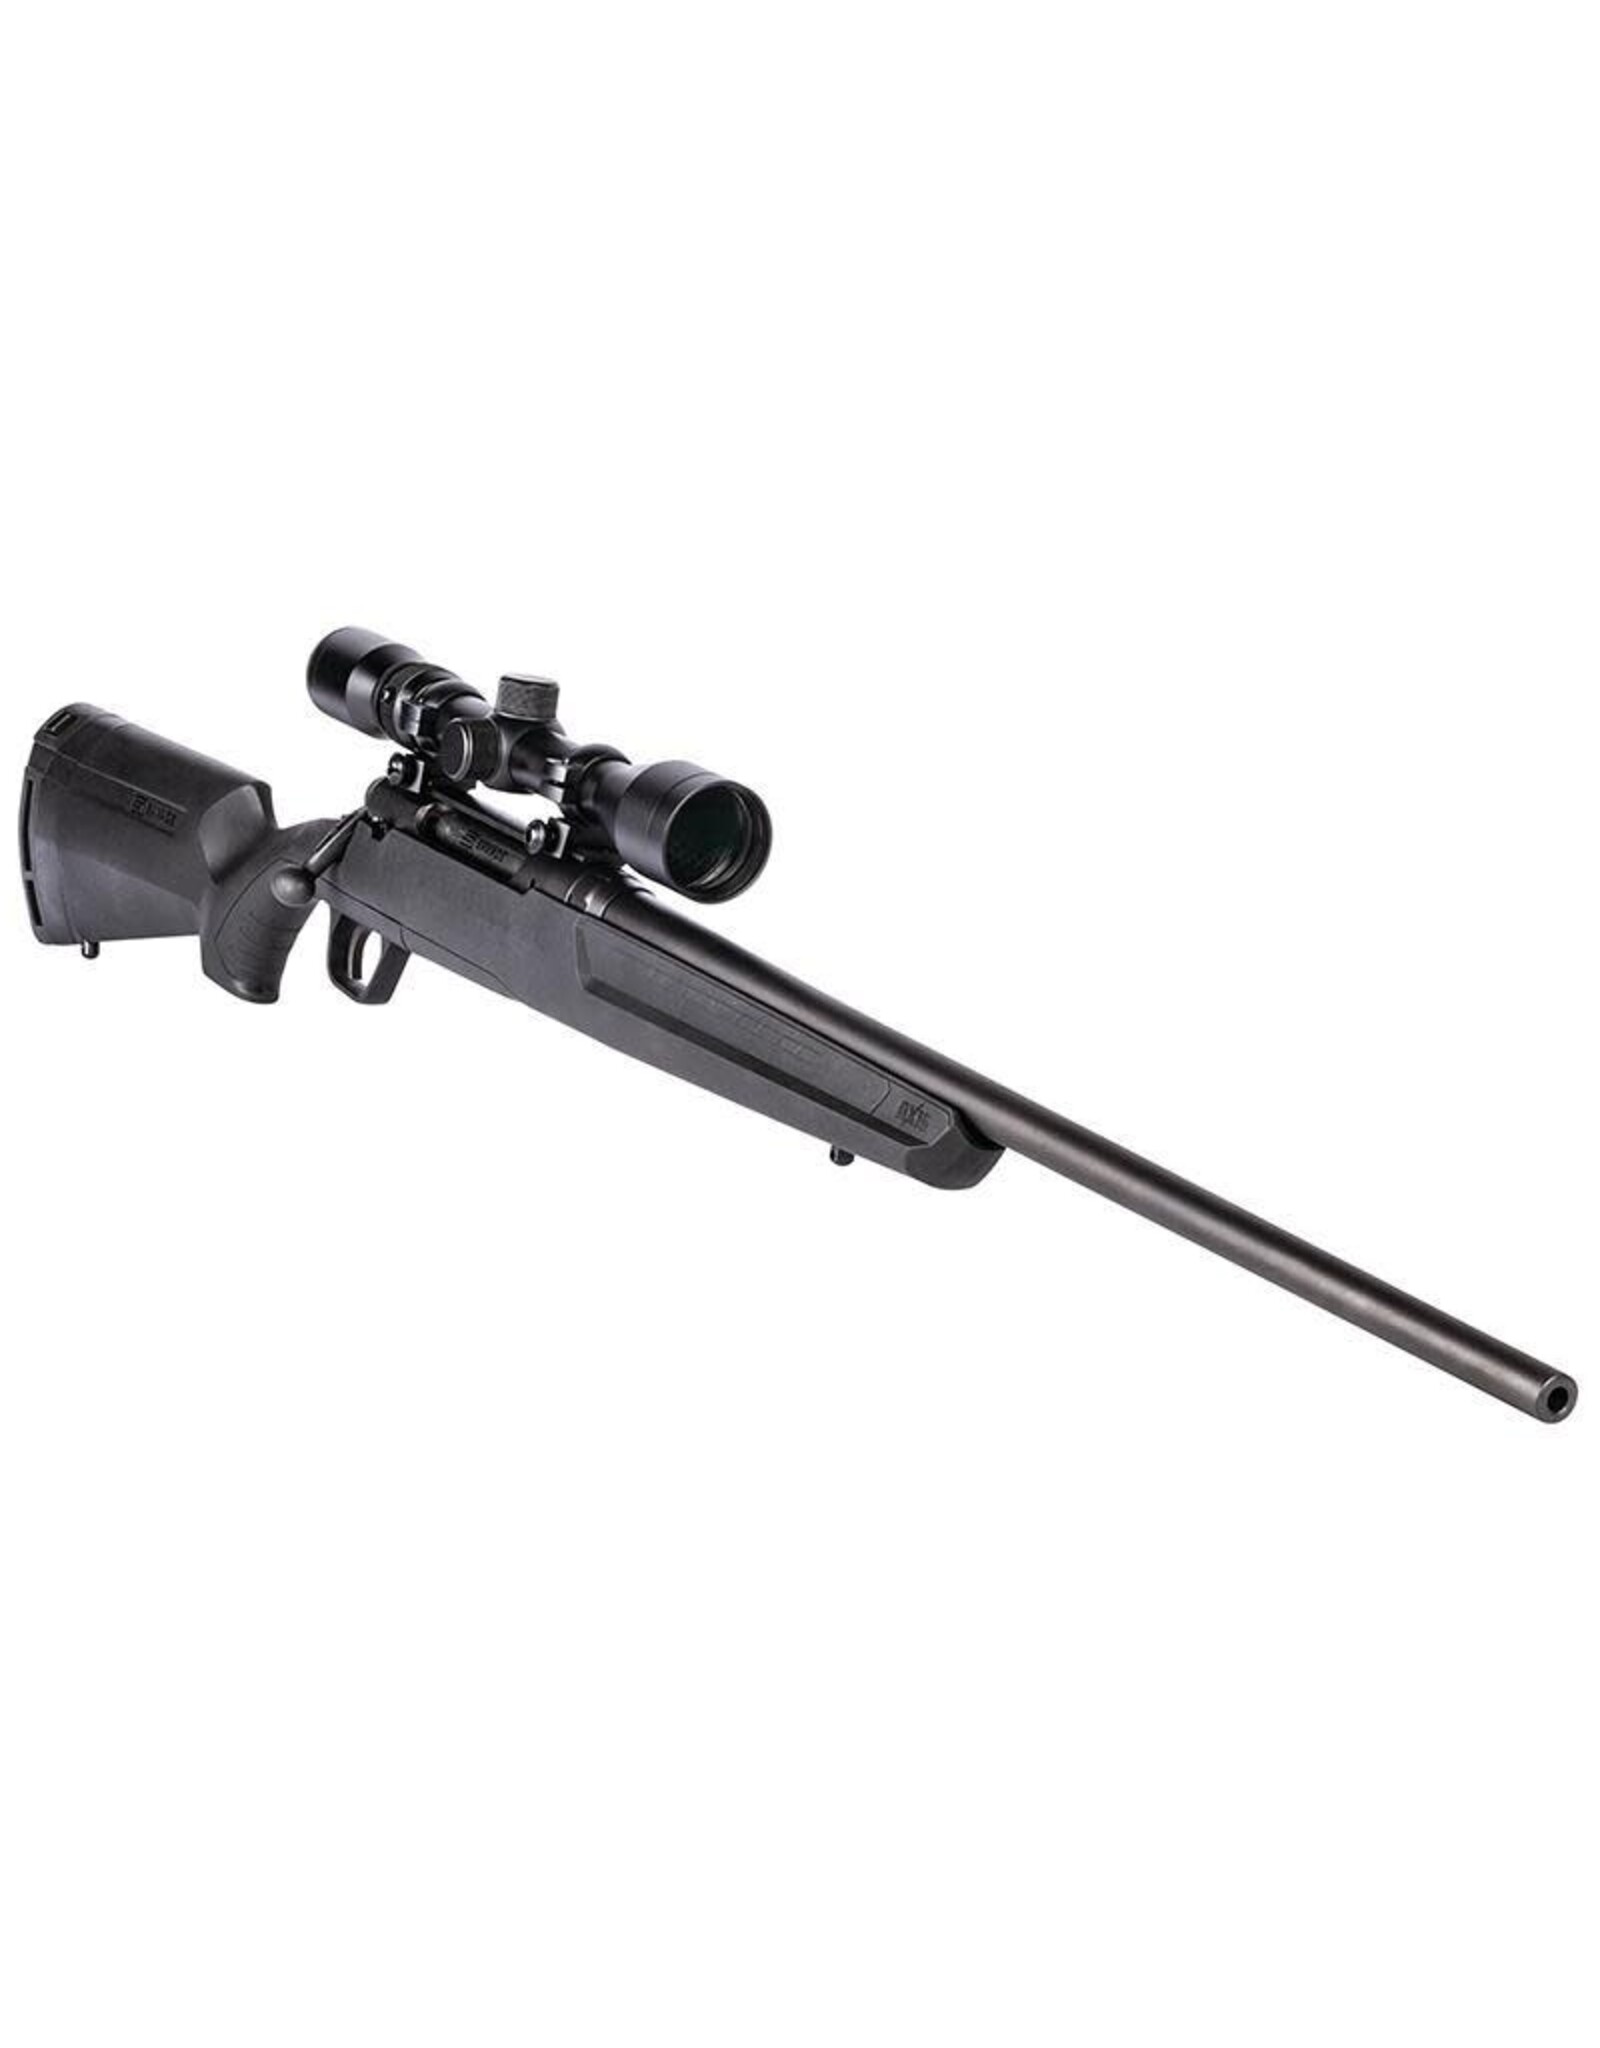 Savage Arms Savage 57264 Axis XP Bolt Action Rifle 30-06 SPR, 22" Bbl Blk, Blk Syn Stock, 4 Rnd Dm, Weaver 3-9X40,